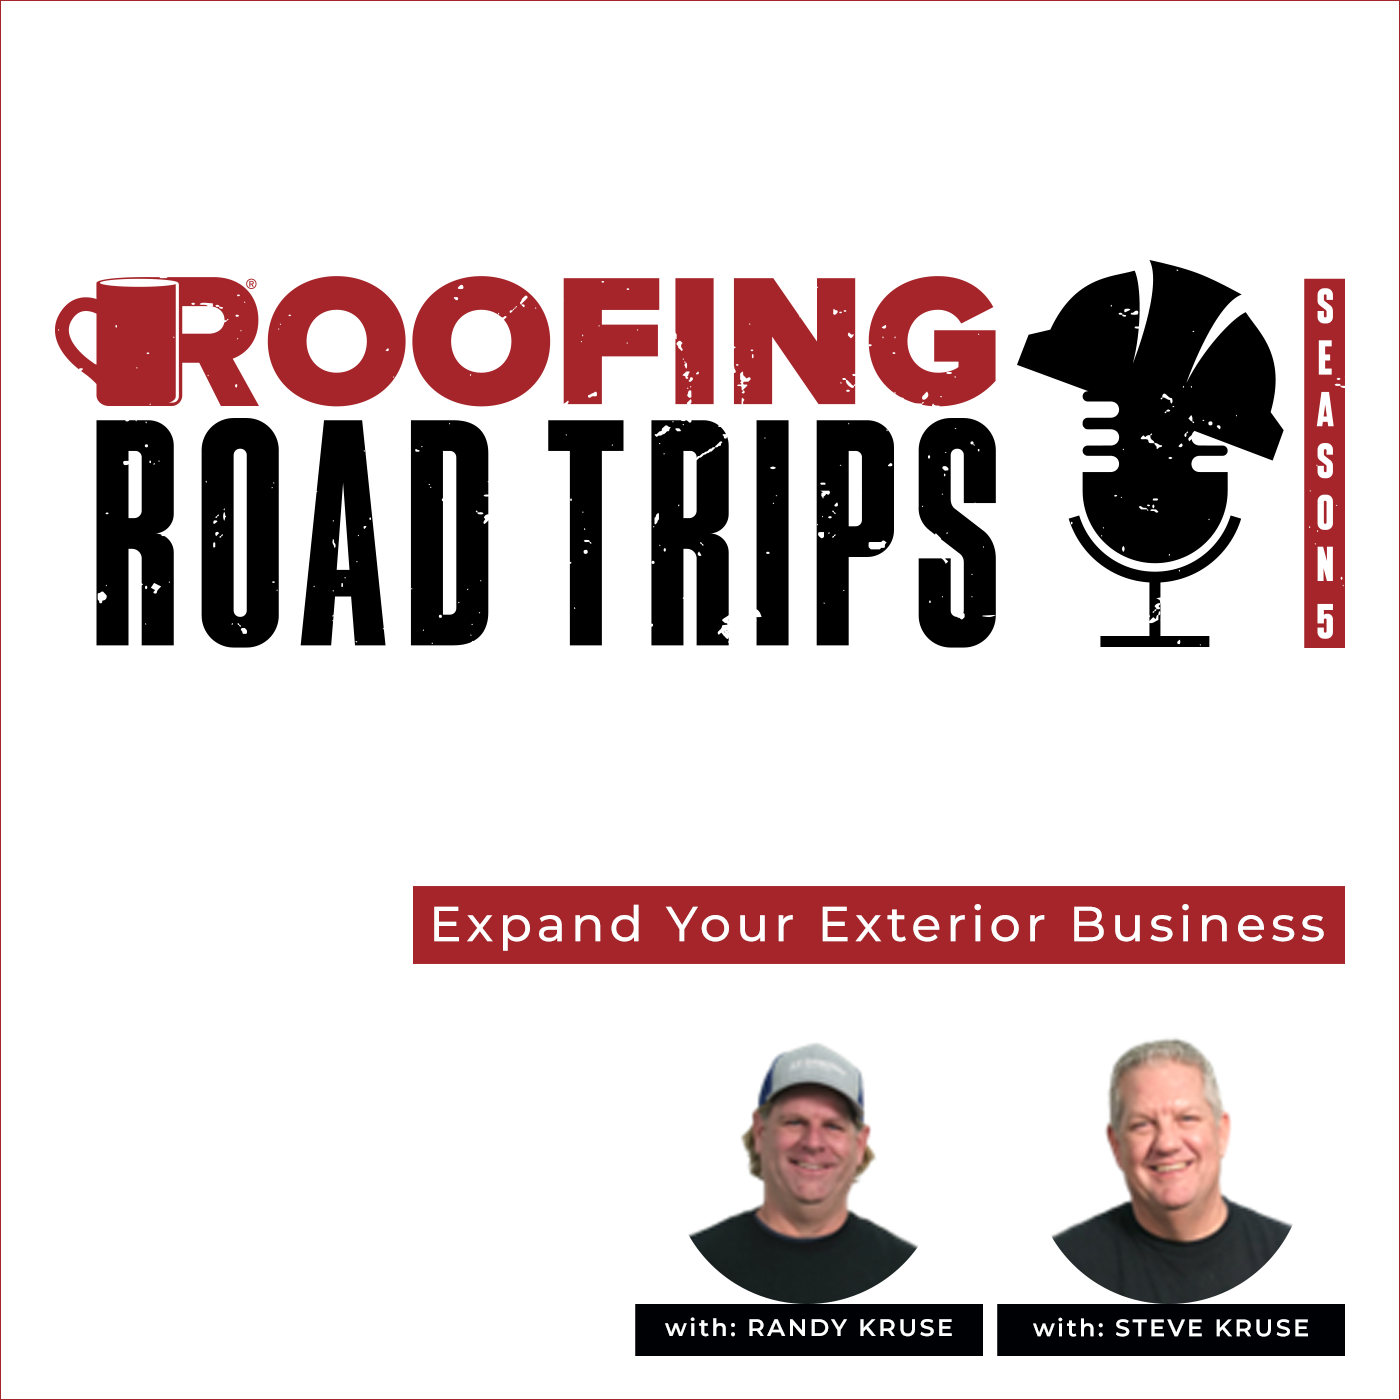 Steve and Randy Kruse - Expand Your Exterior Business